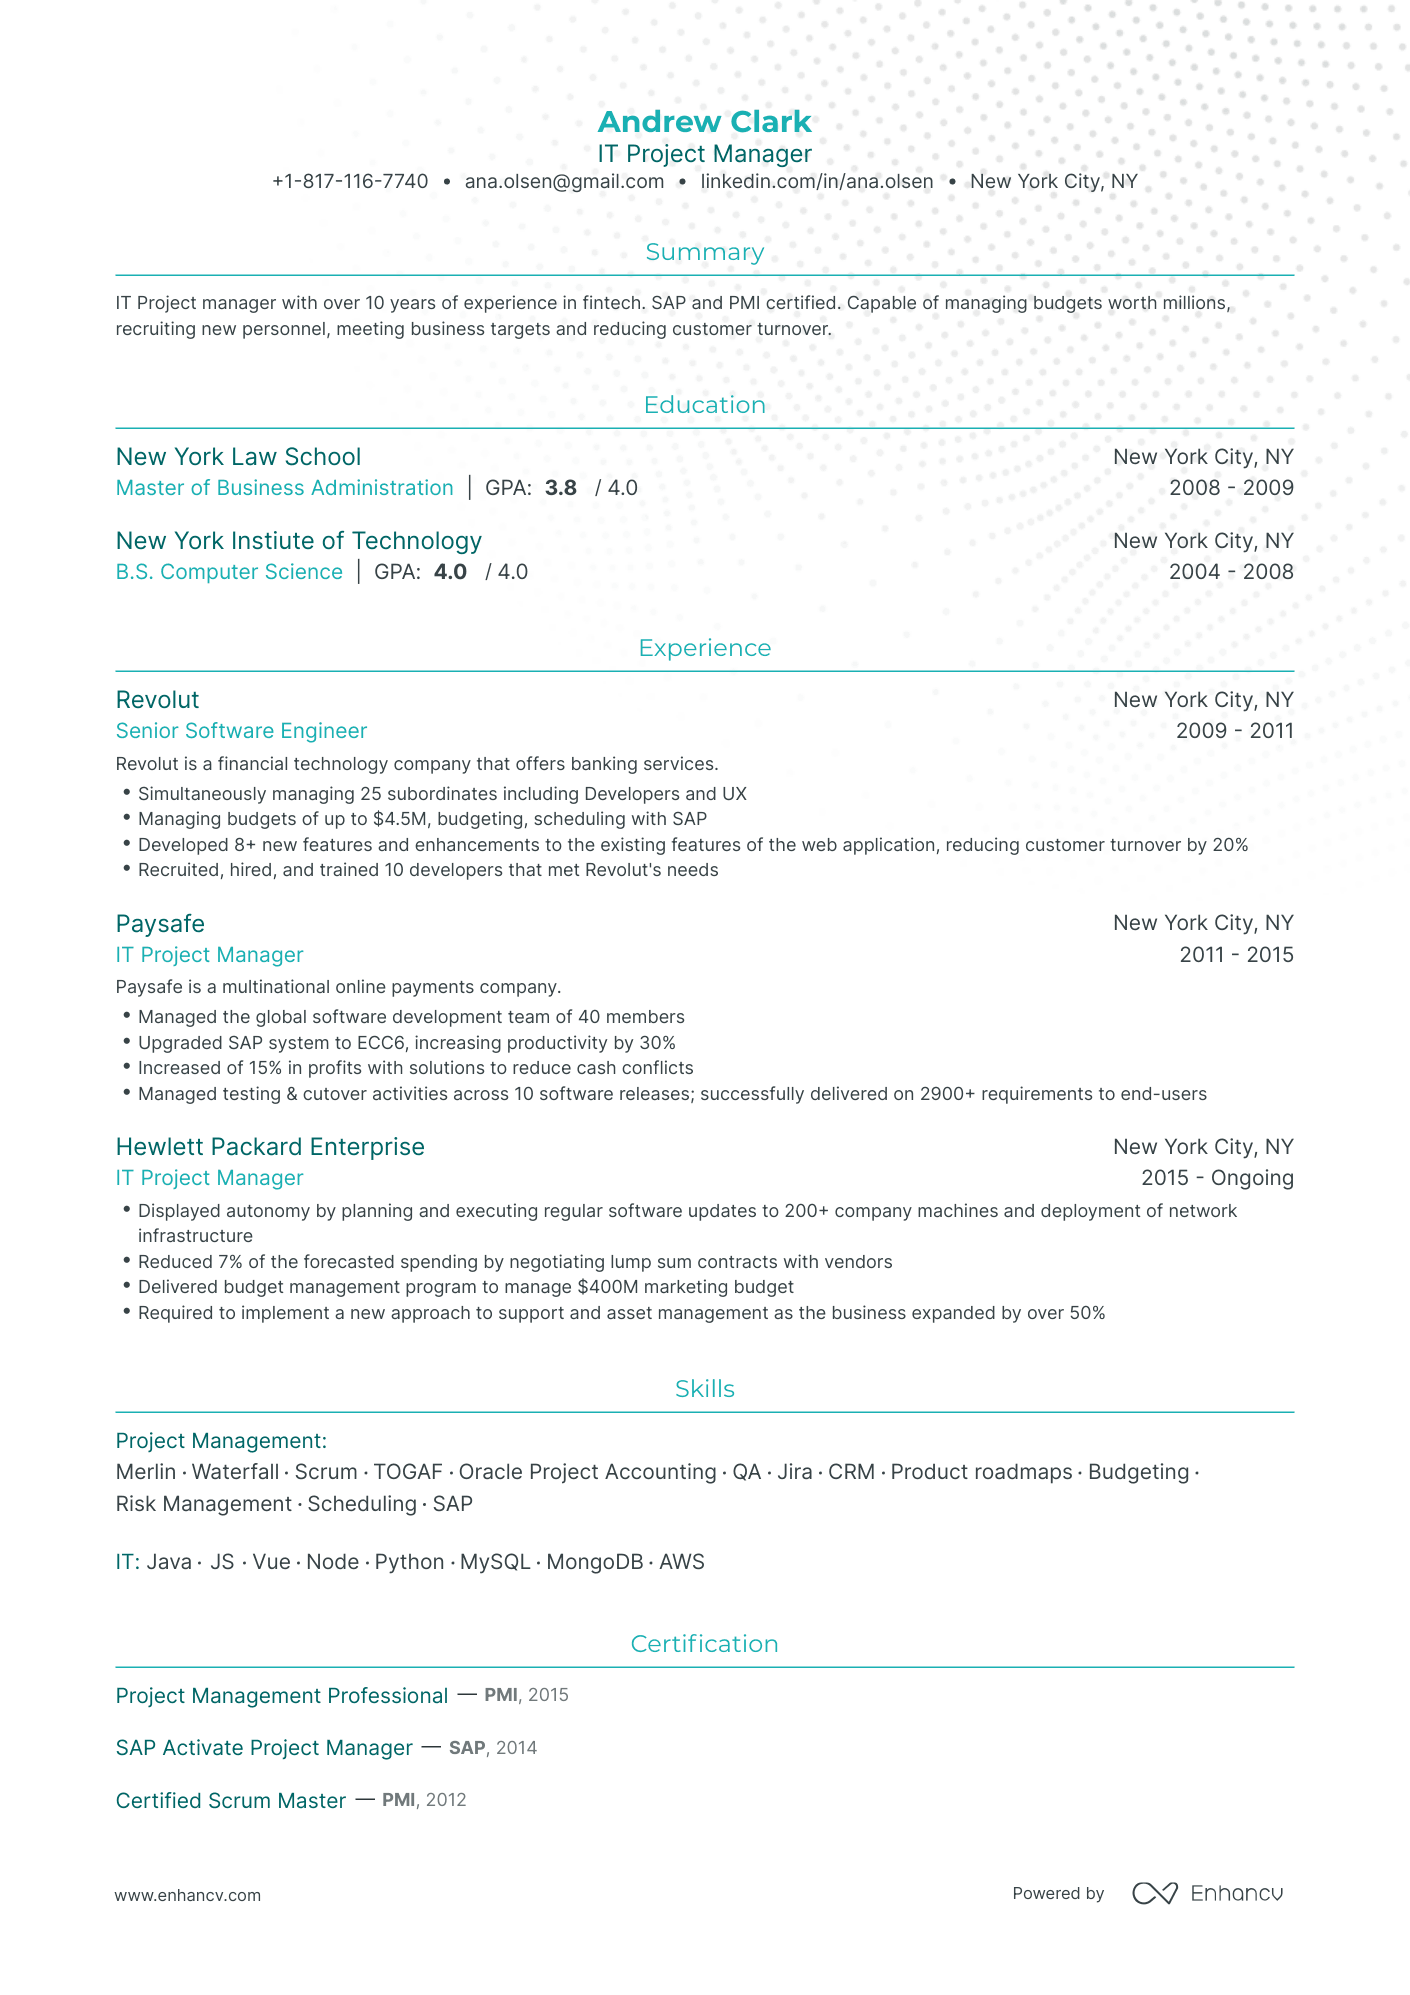 Traditional IT Project Manager Resume Template